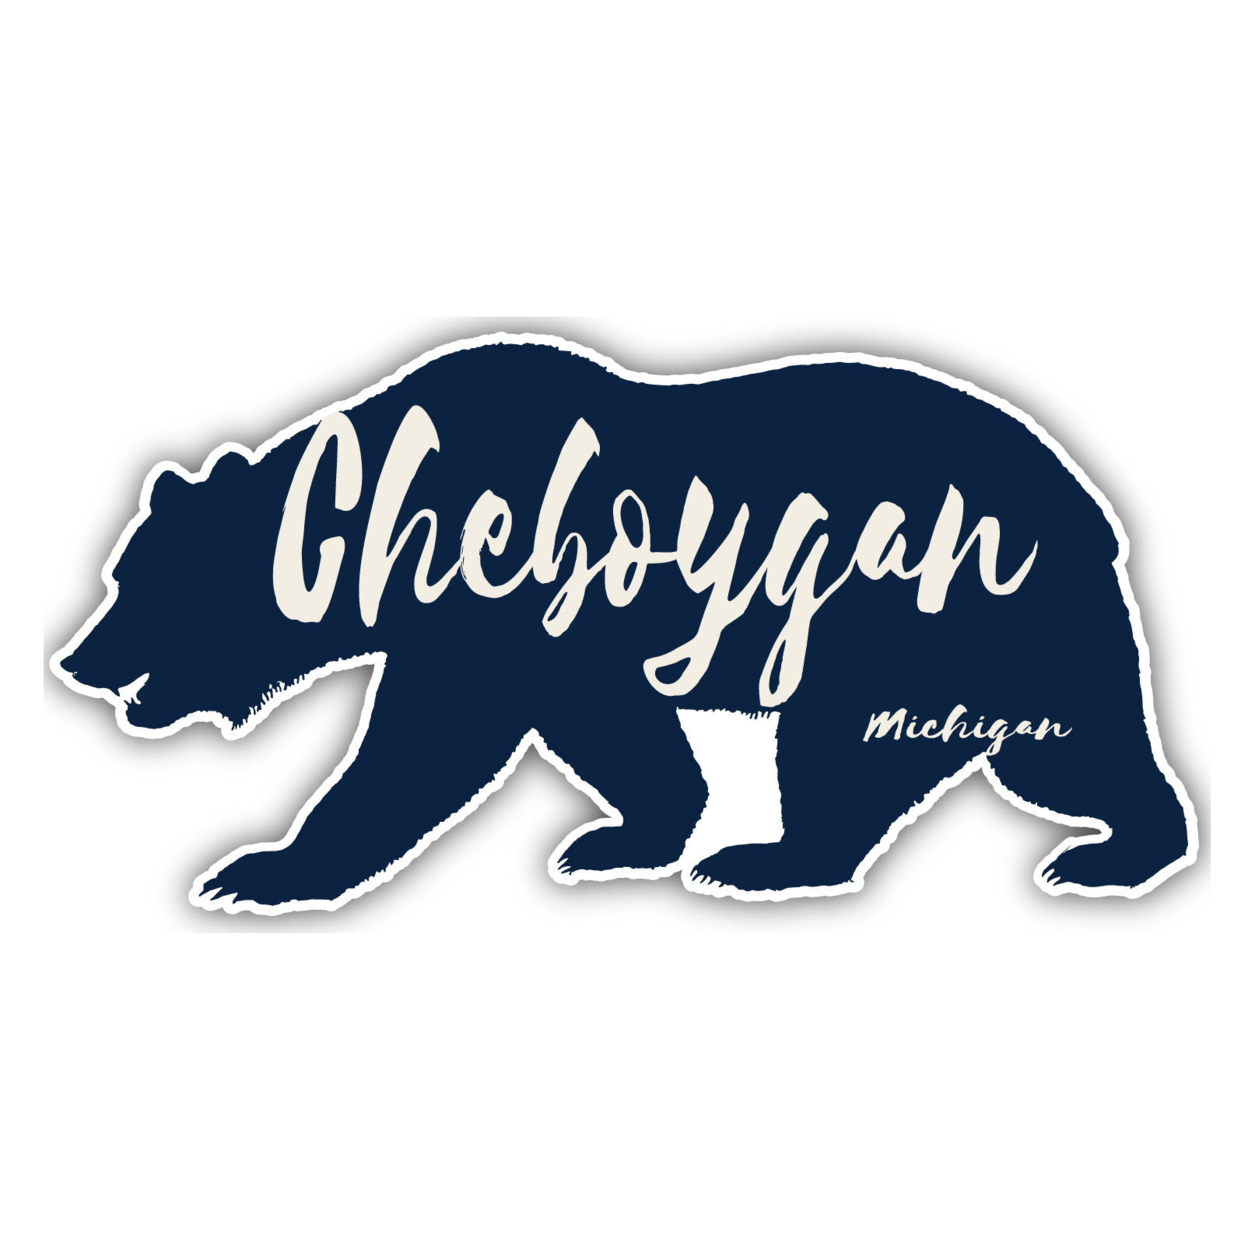 Cheboygan Michigan Souvenir Decorative Stickers (Choose Theme And Size) - 4-Pack, 4-Inch, Great Outdoors